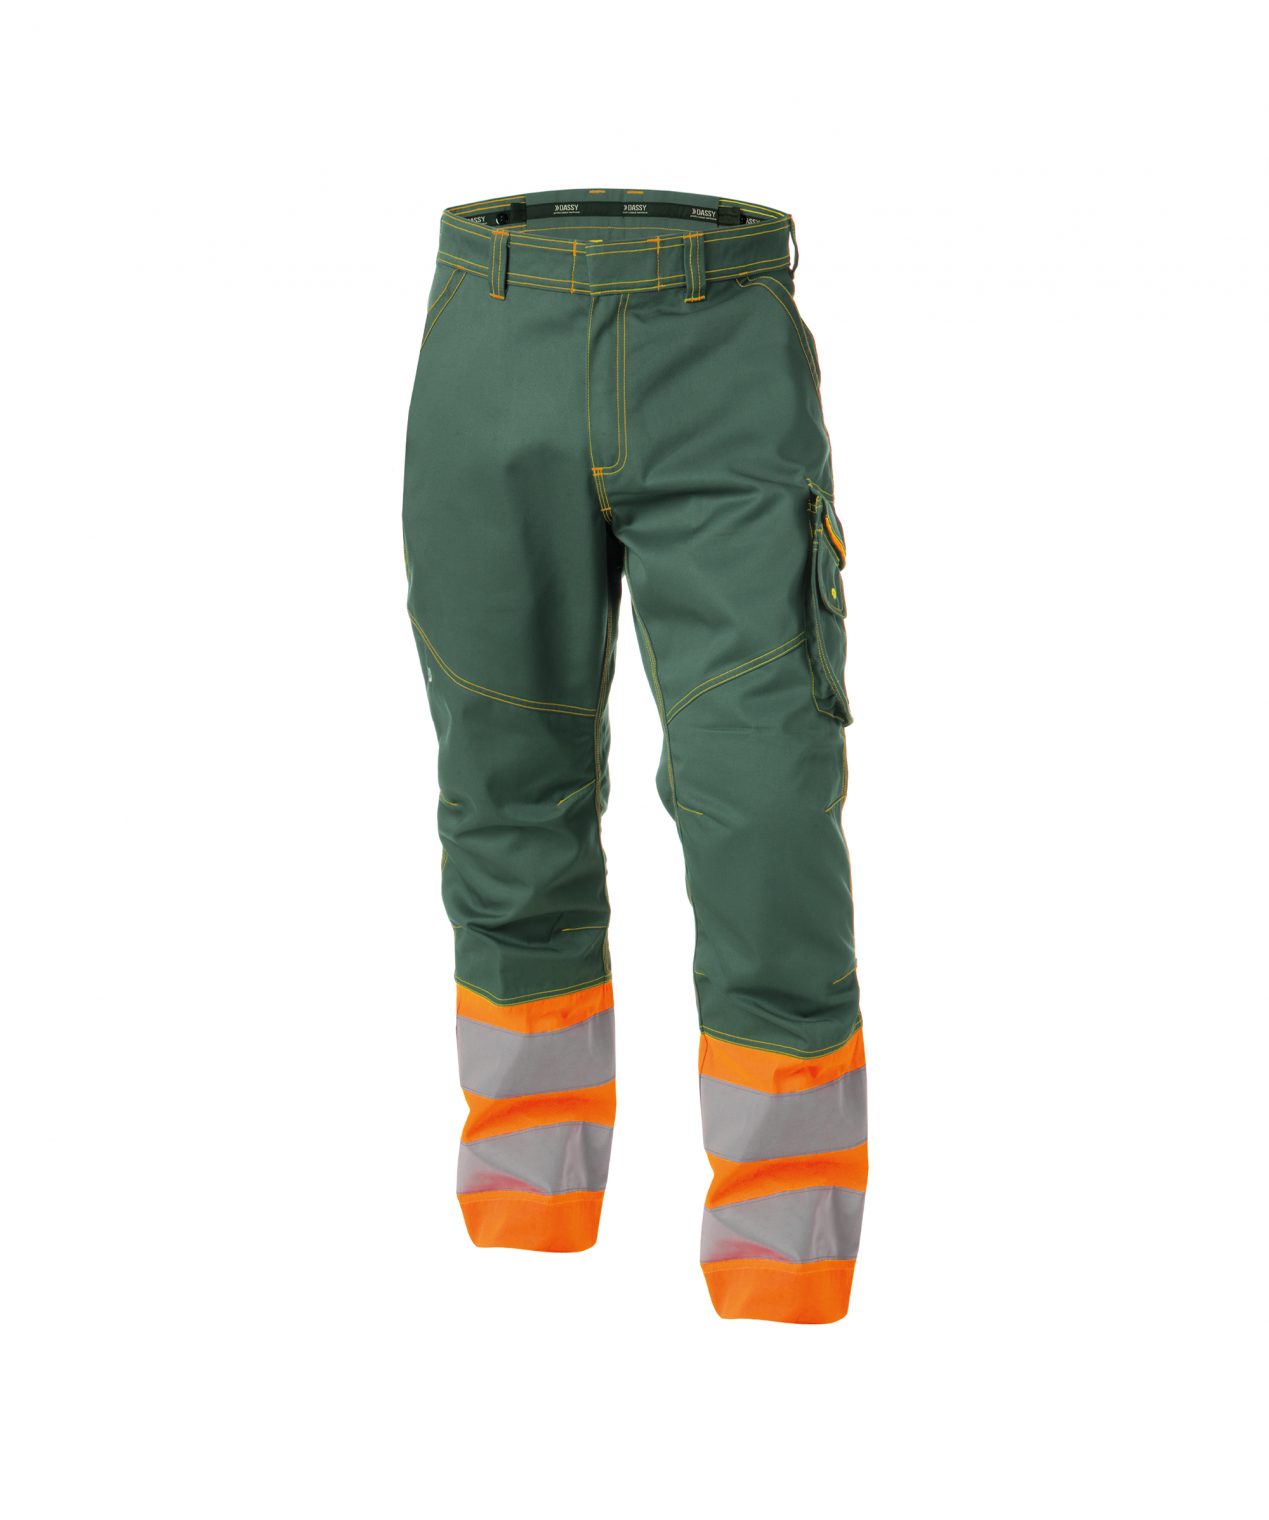 phoenix high visibility work trousers bottle green fluo orange front